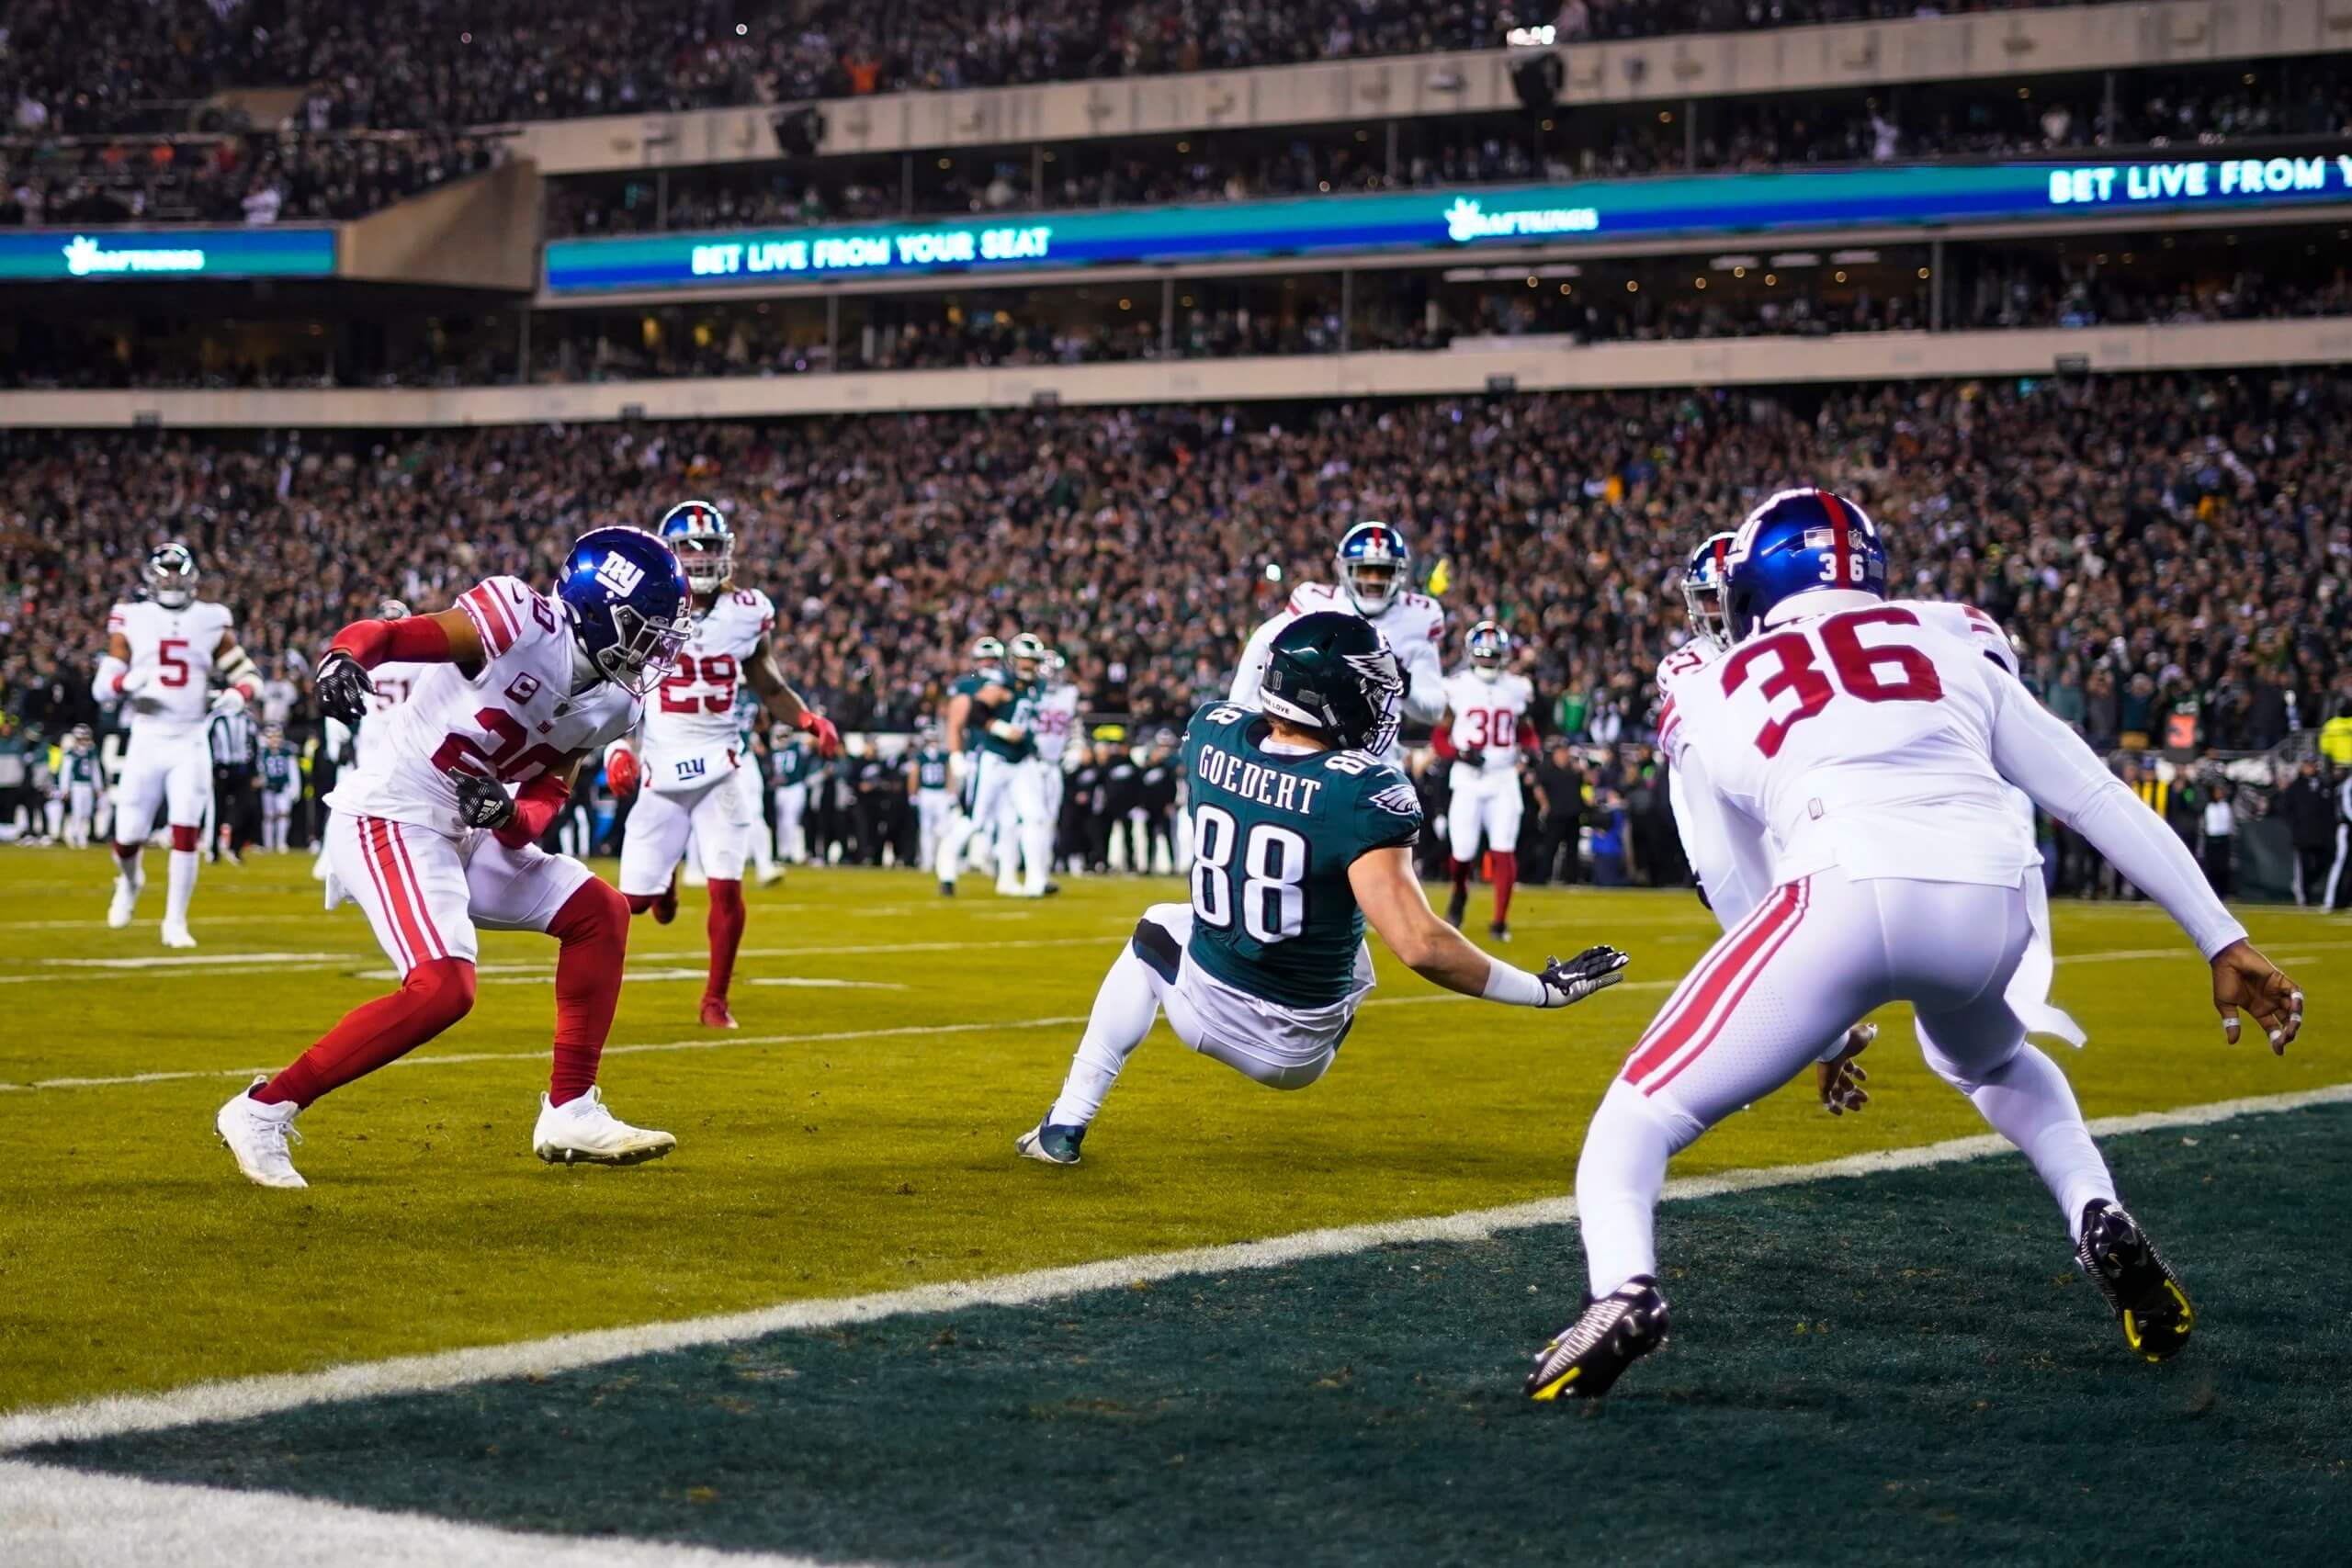 NY Giants game this weekend: They know what to expect vs Eagles